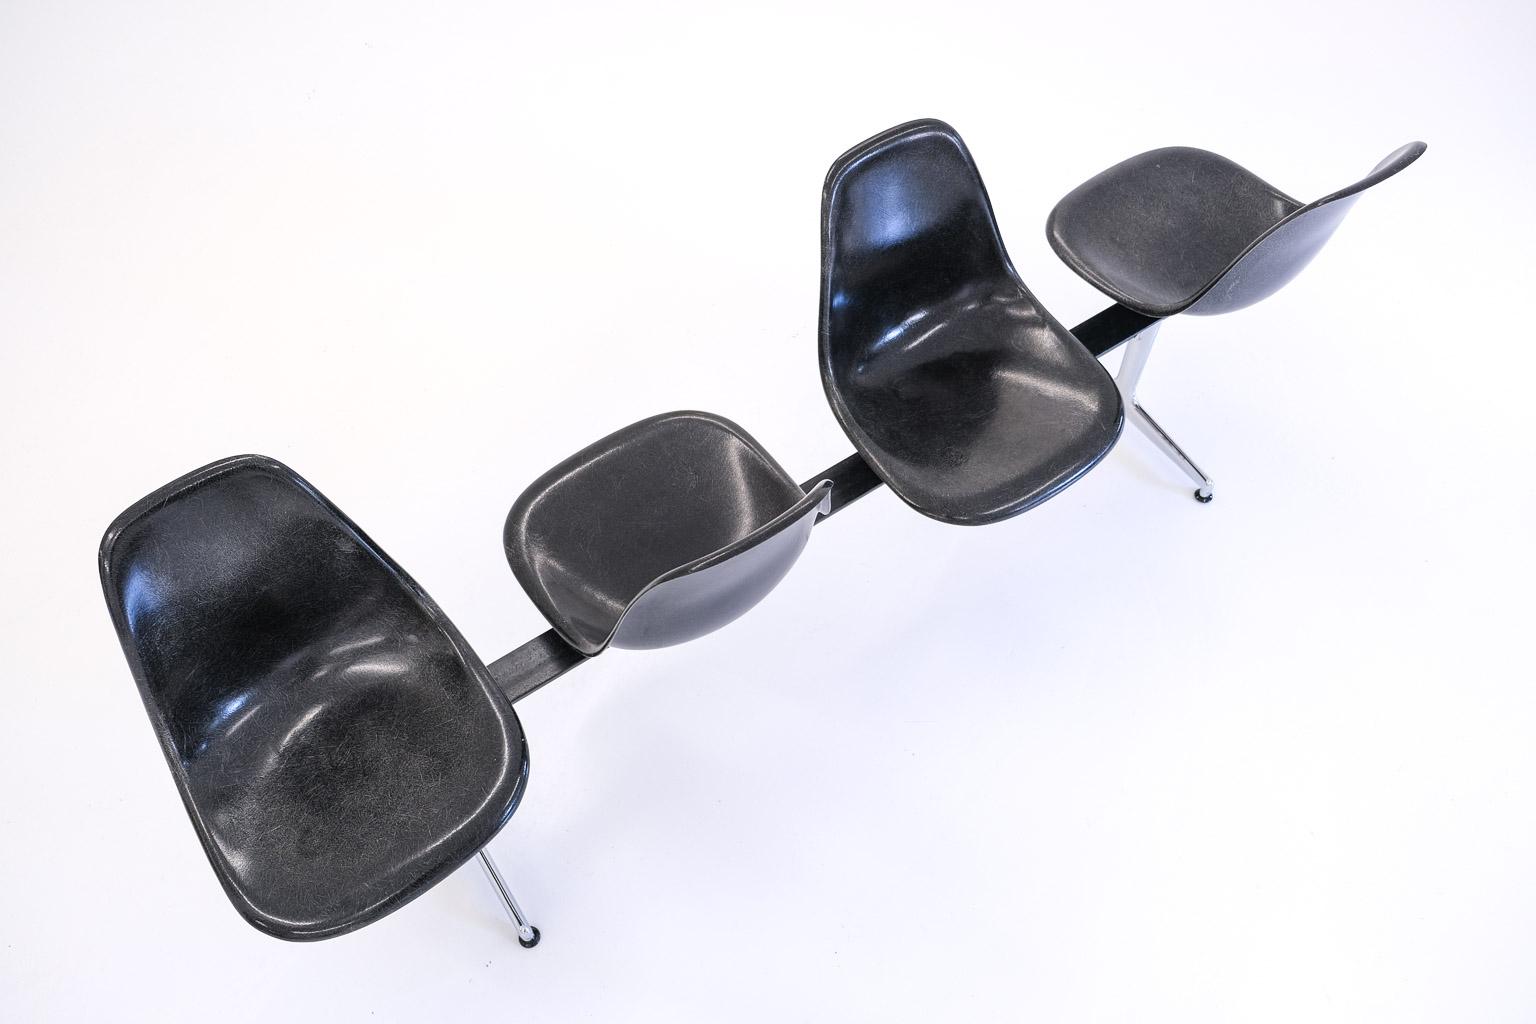 Mid-Century Modern Tandem shell seating system by Ray and Charles Eames for Herman Miller